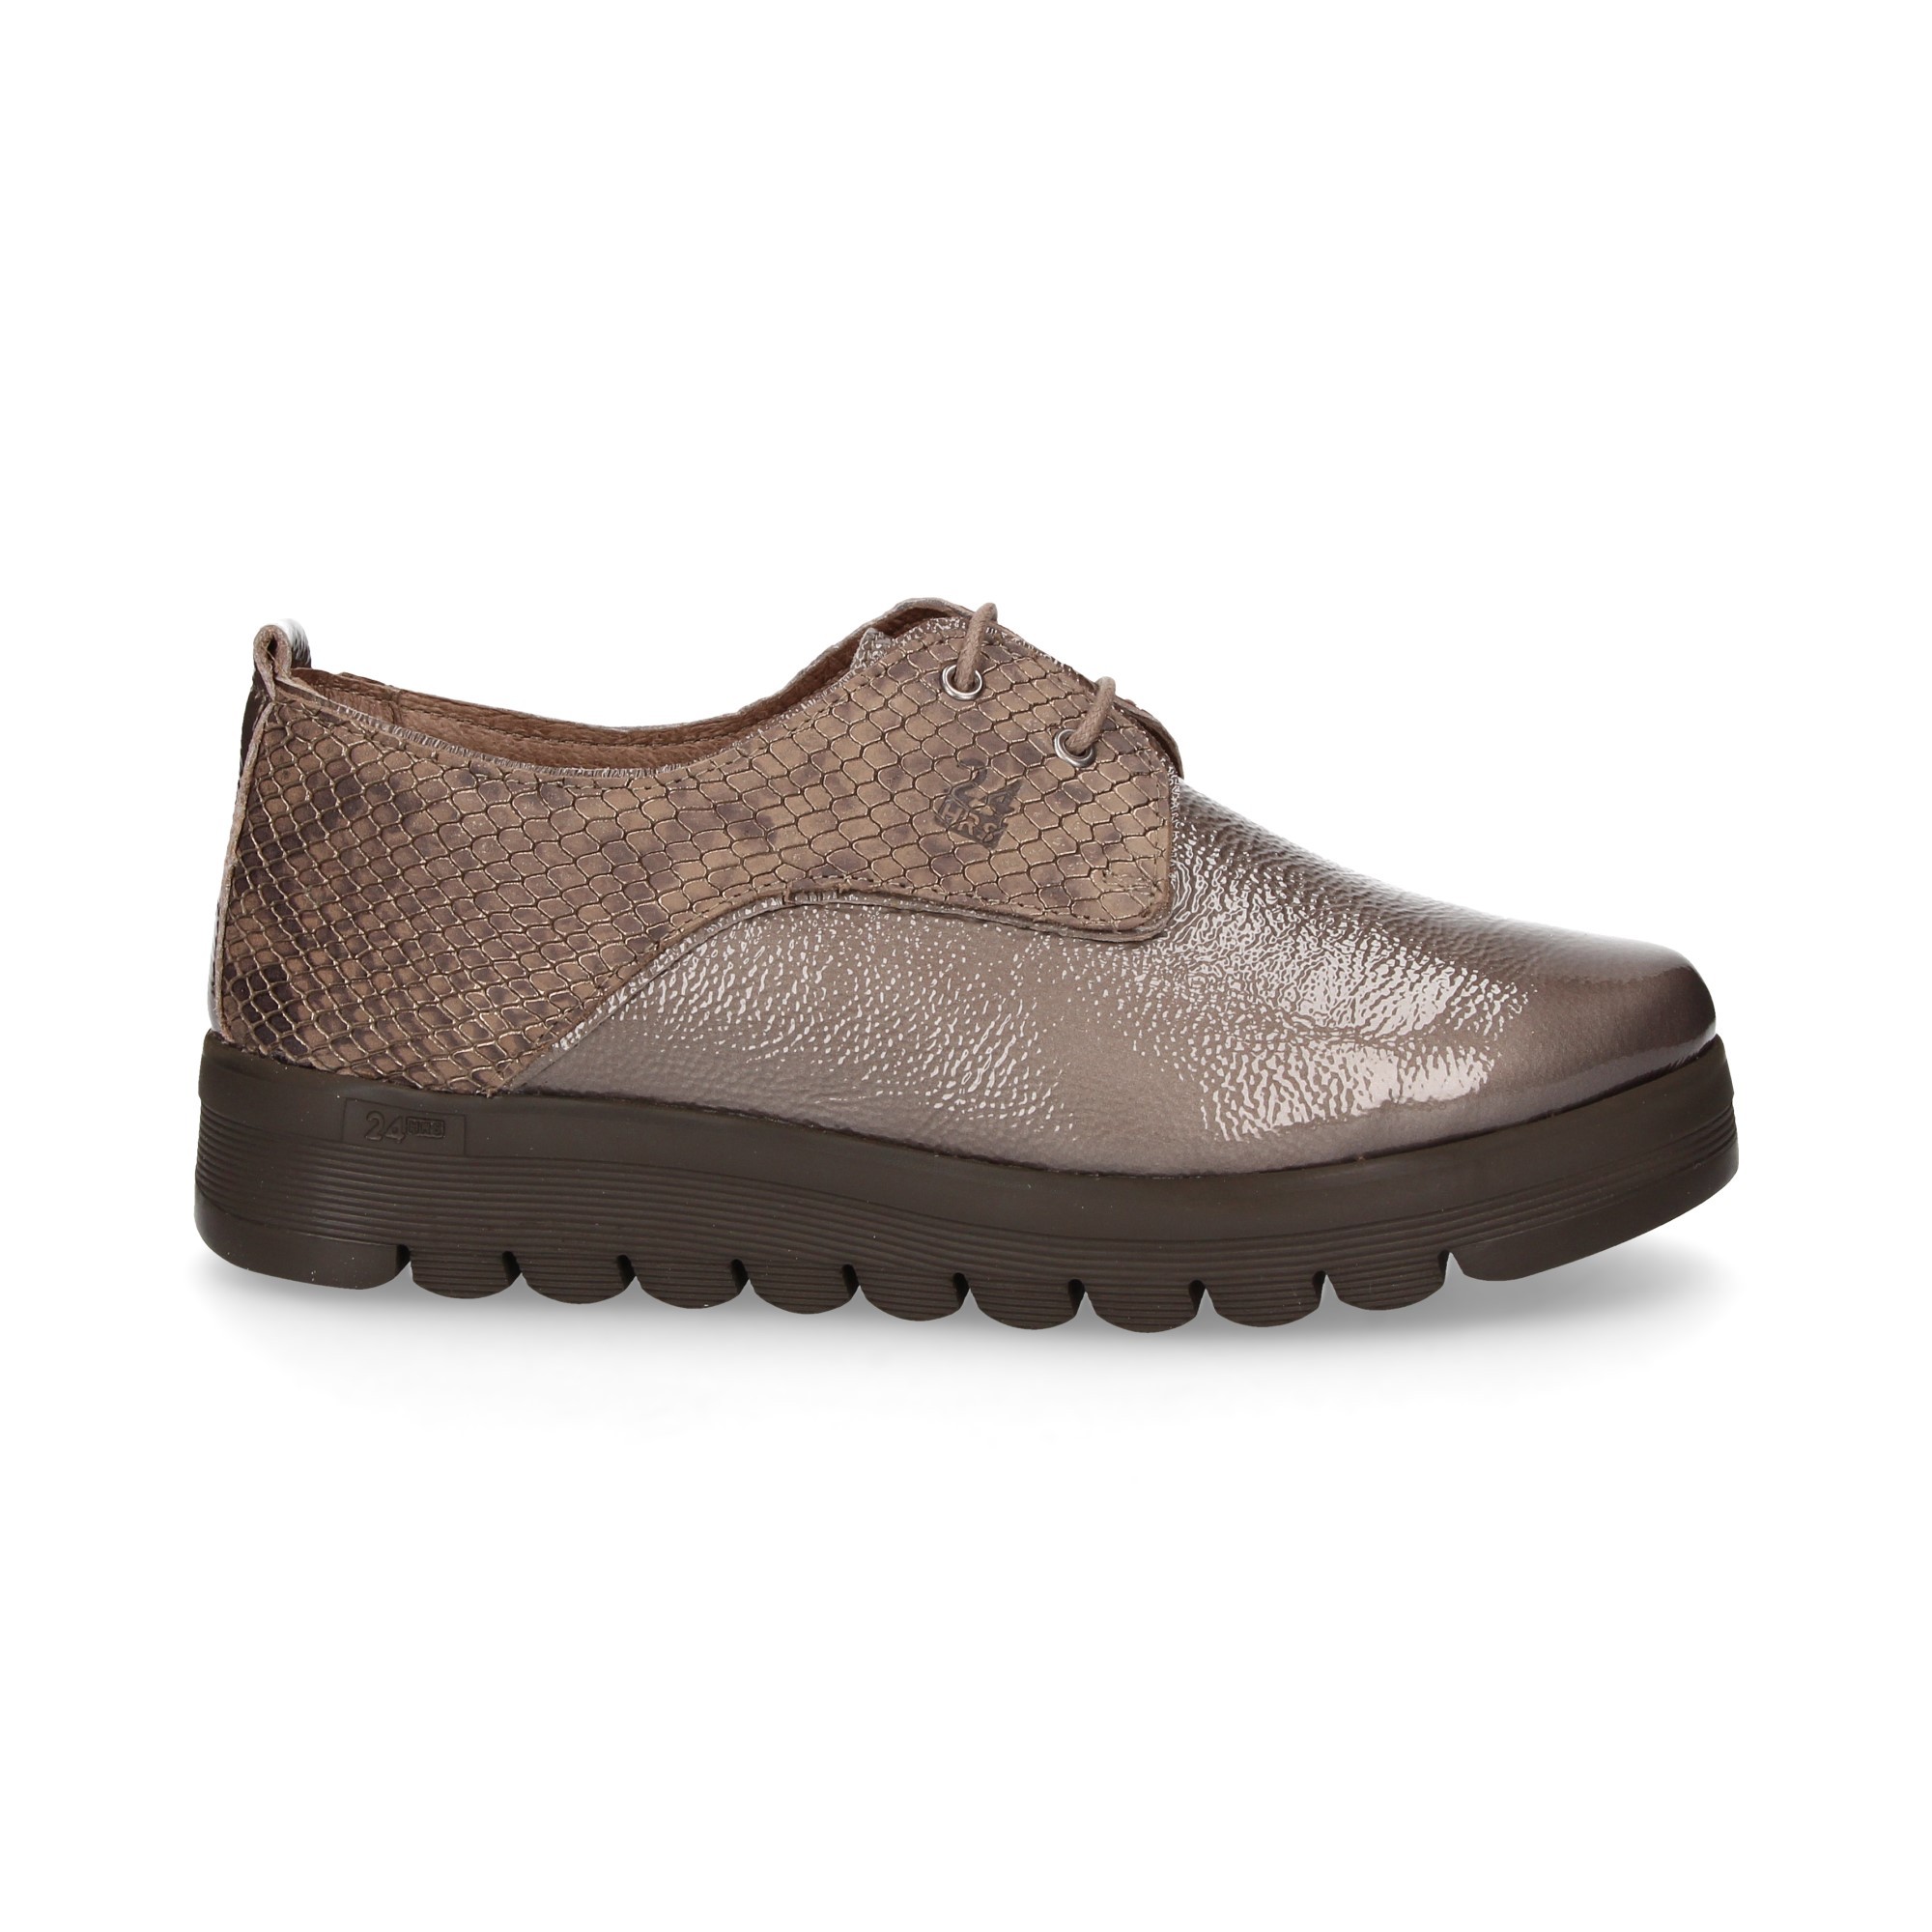 grey-patent-leather-reptile-blucher